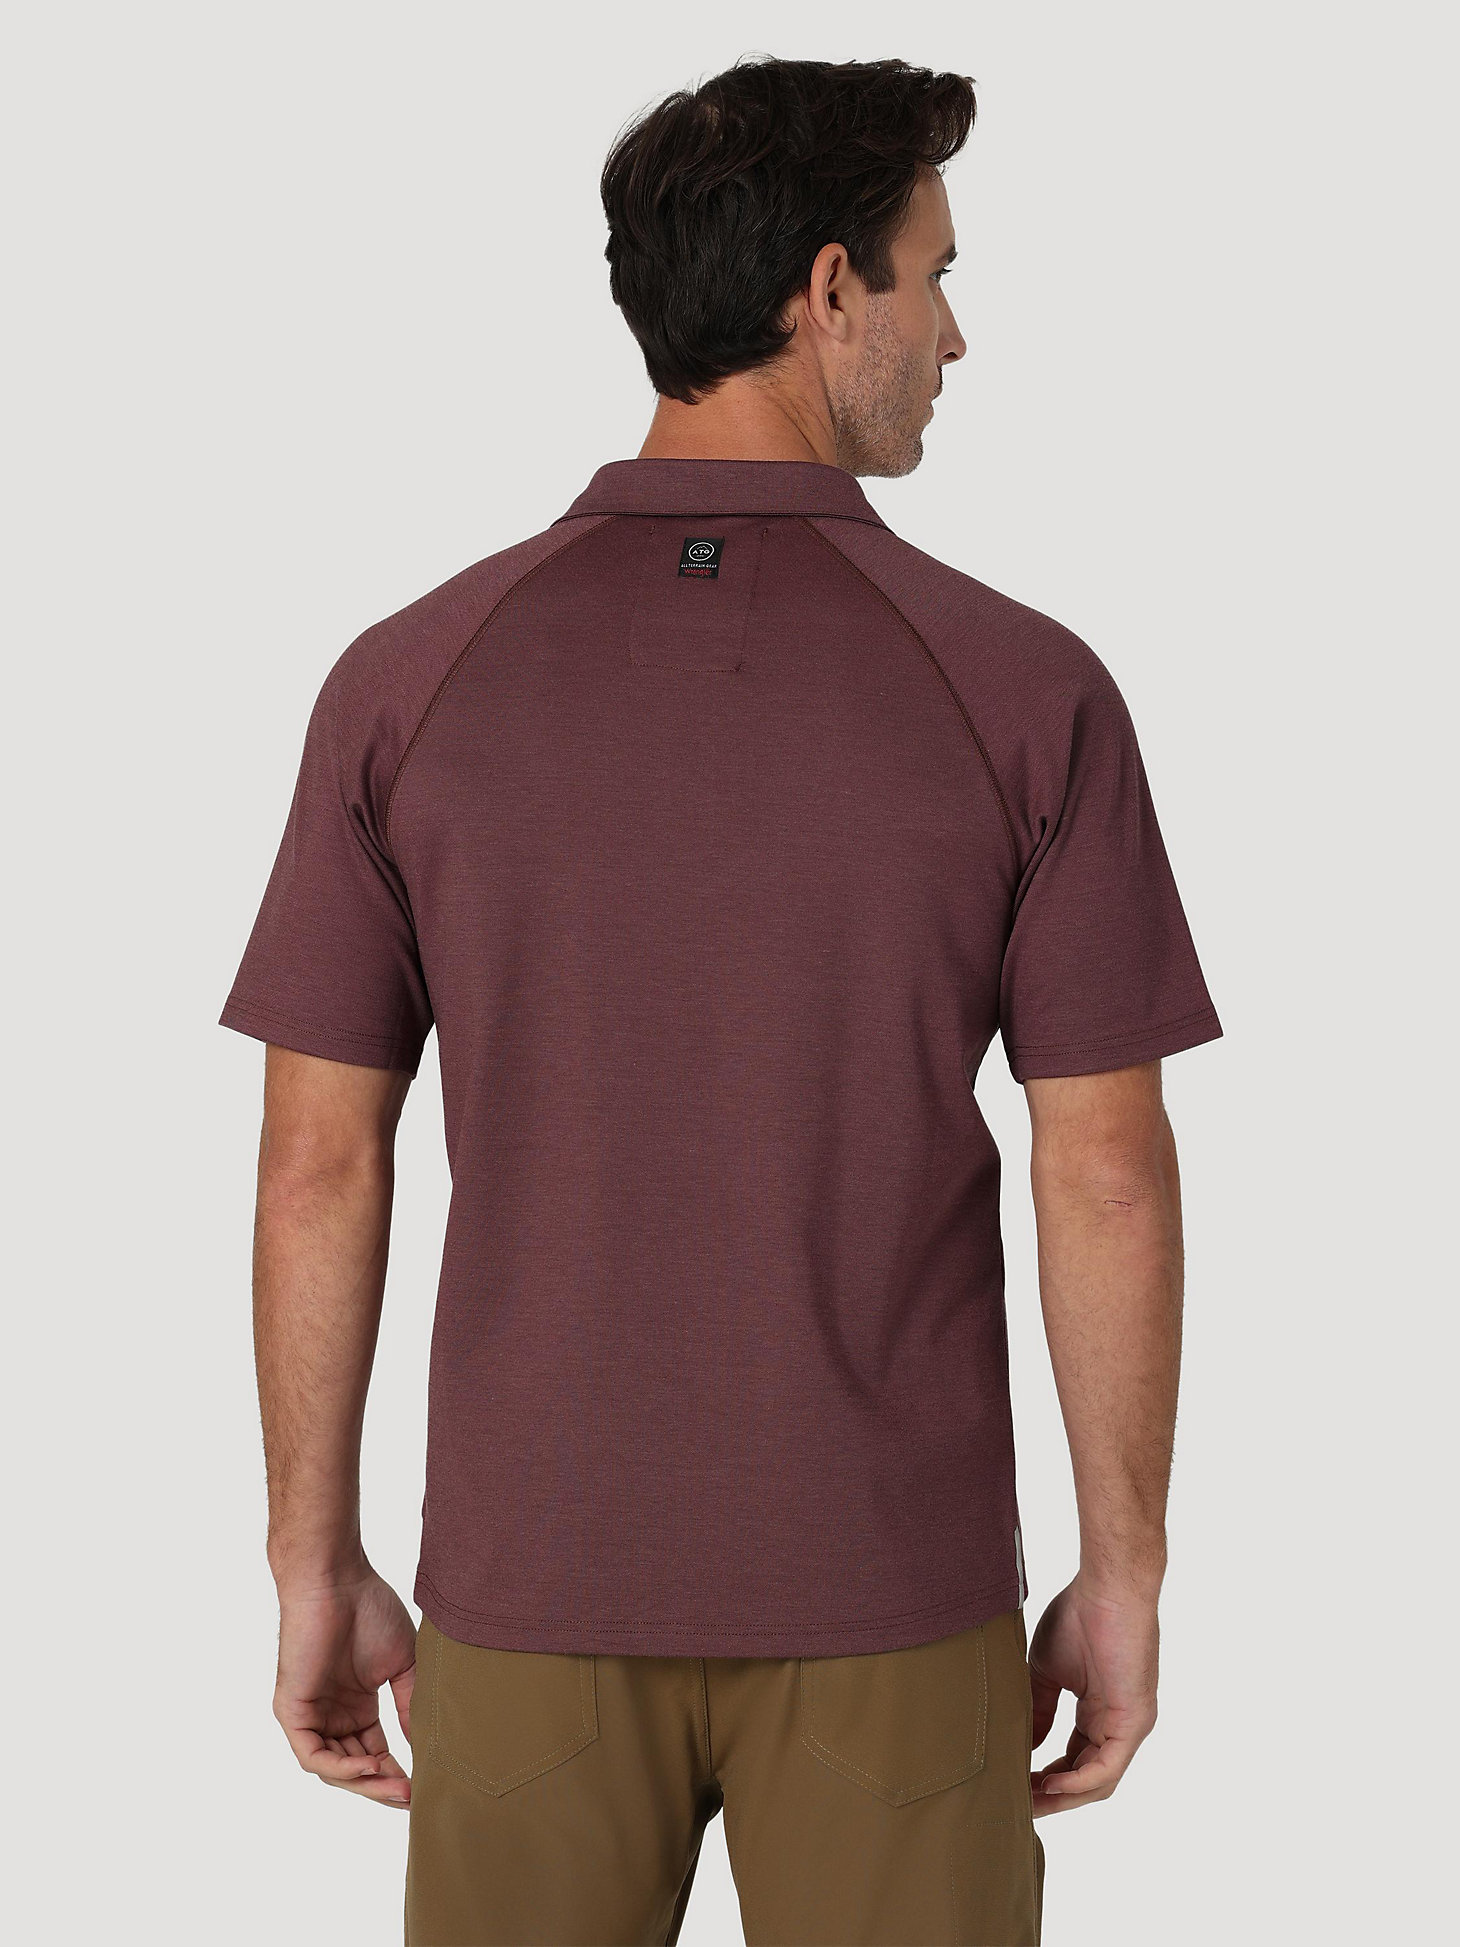 Short Sleeve Performance Polo in Decadent Chocolate alternative view 2